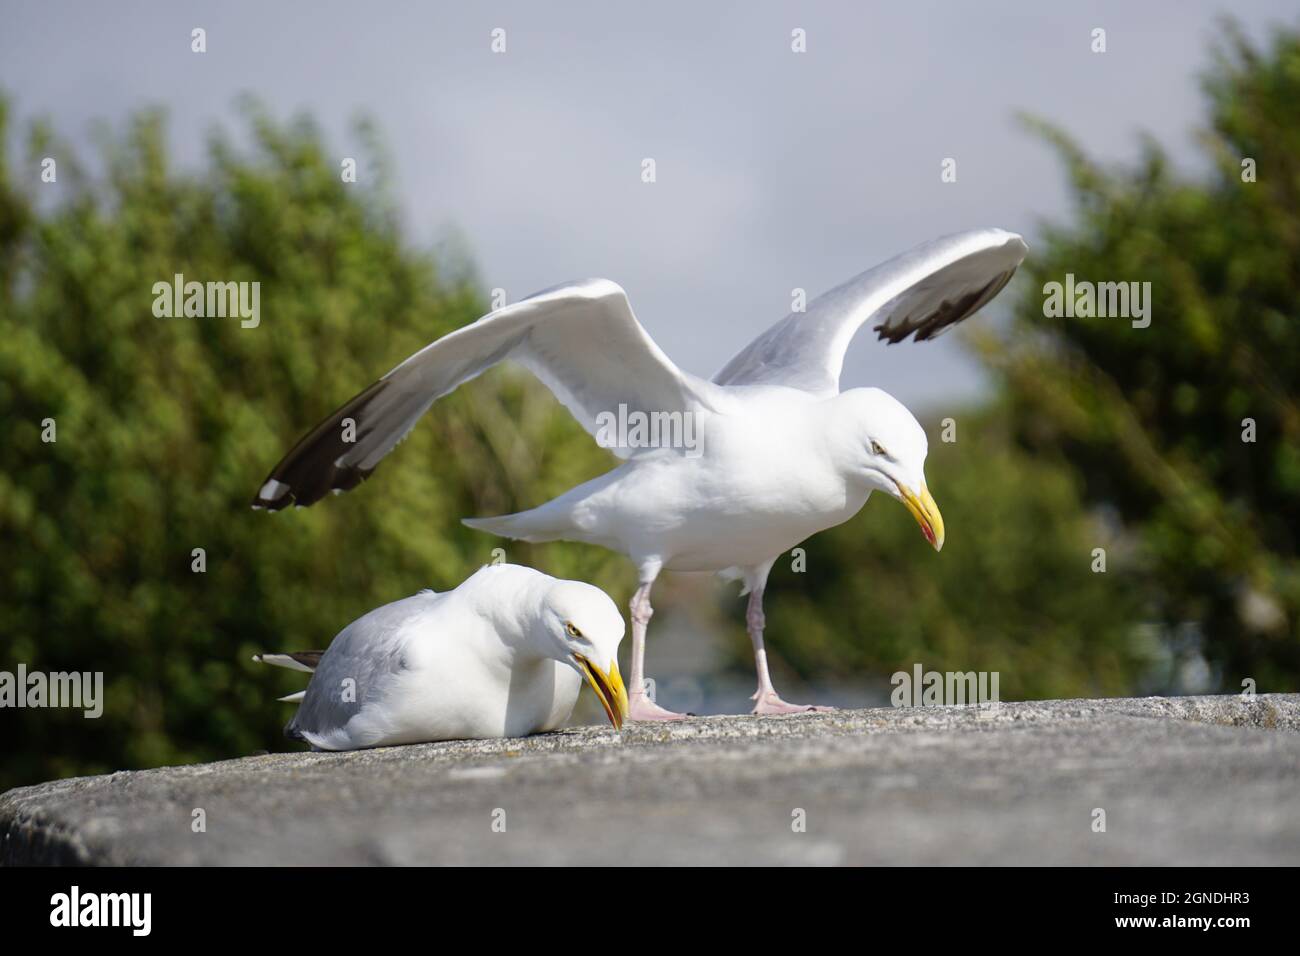 Two assertive Seagulls (herring gulls)  on a ledge. One lying down. One standing with outstretched wings Stock Photo